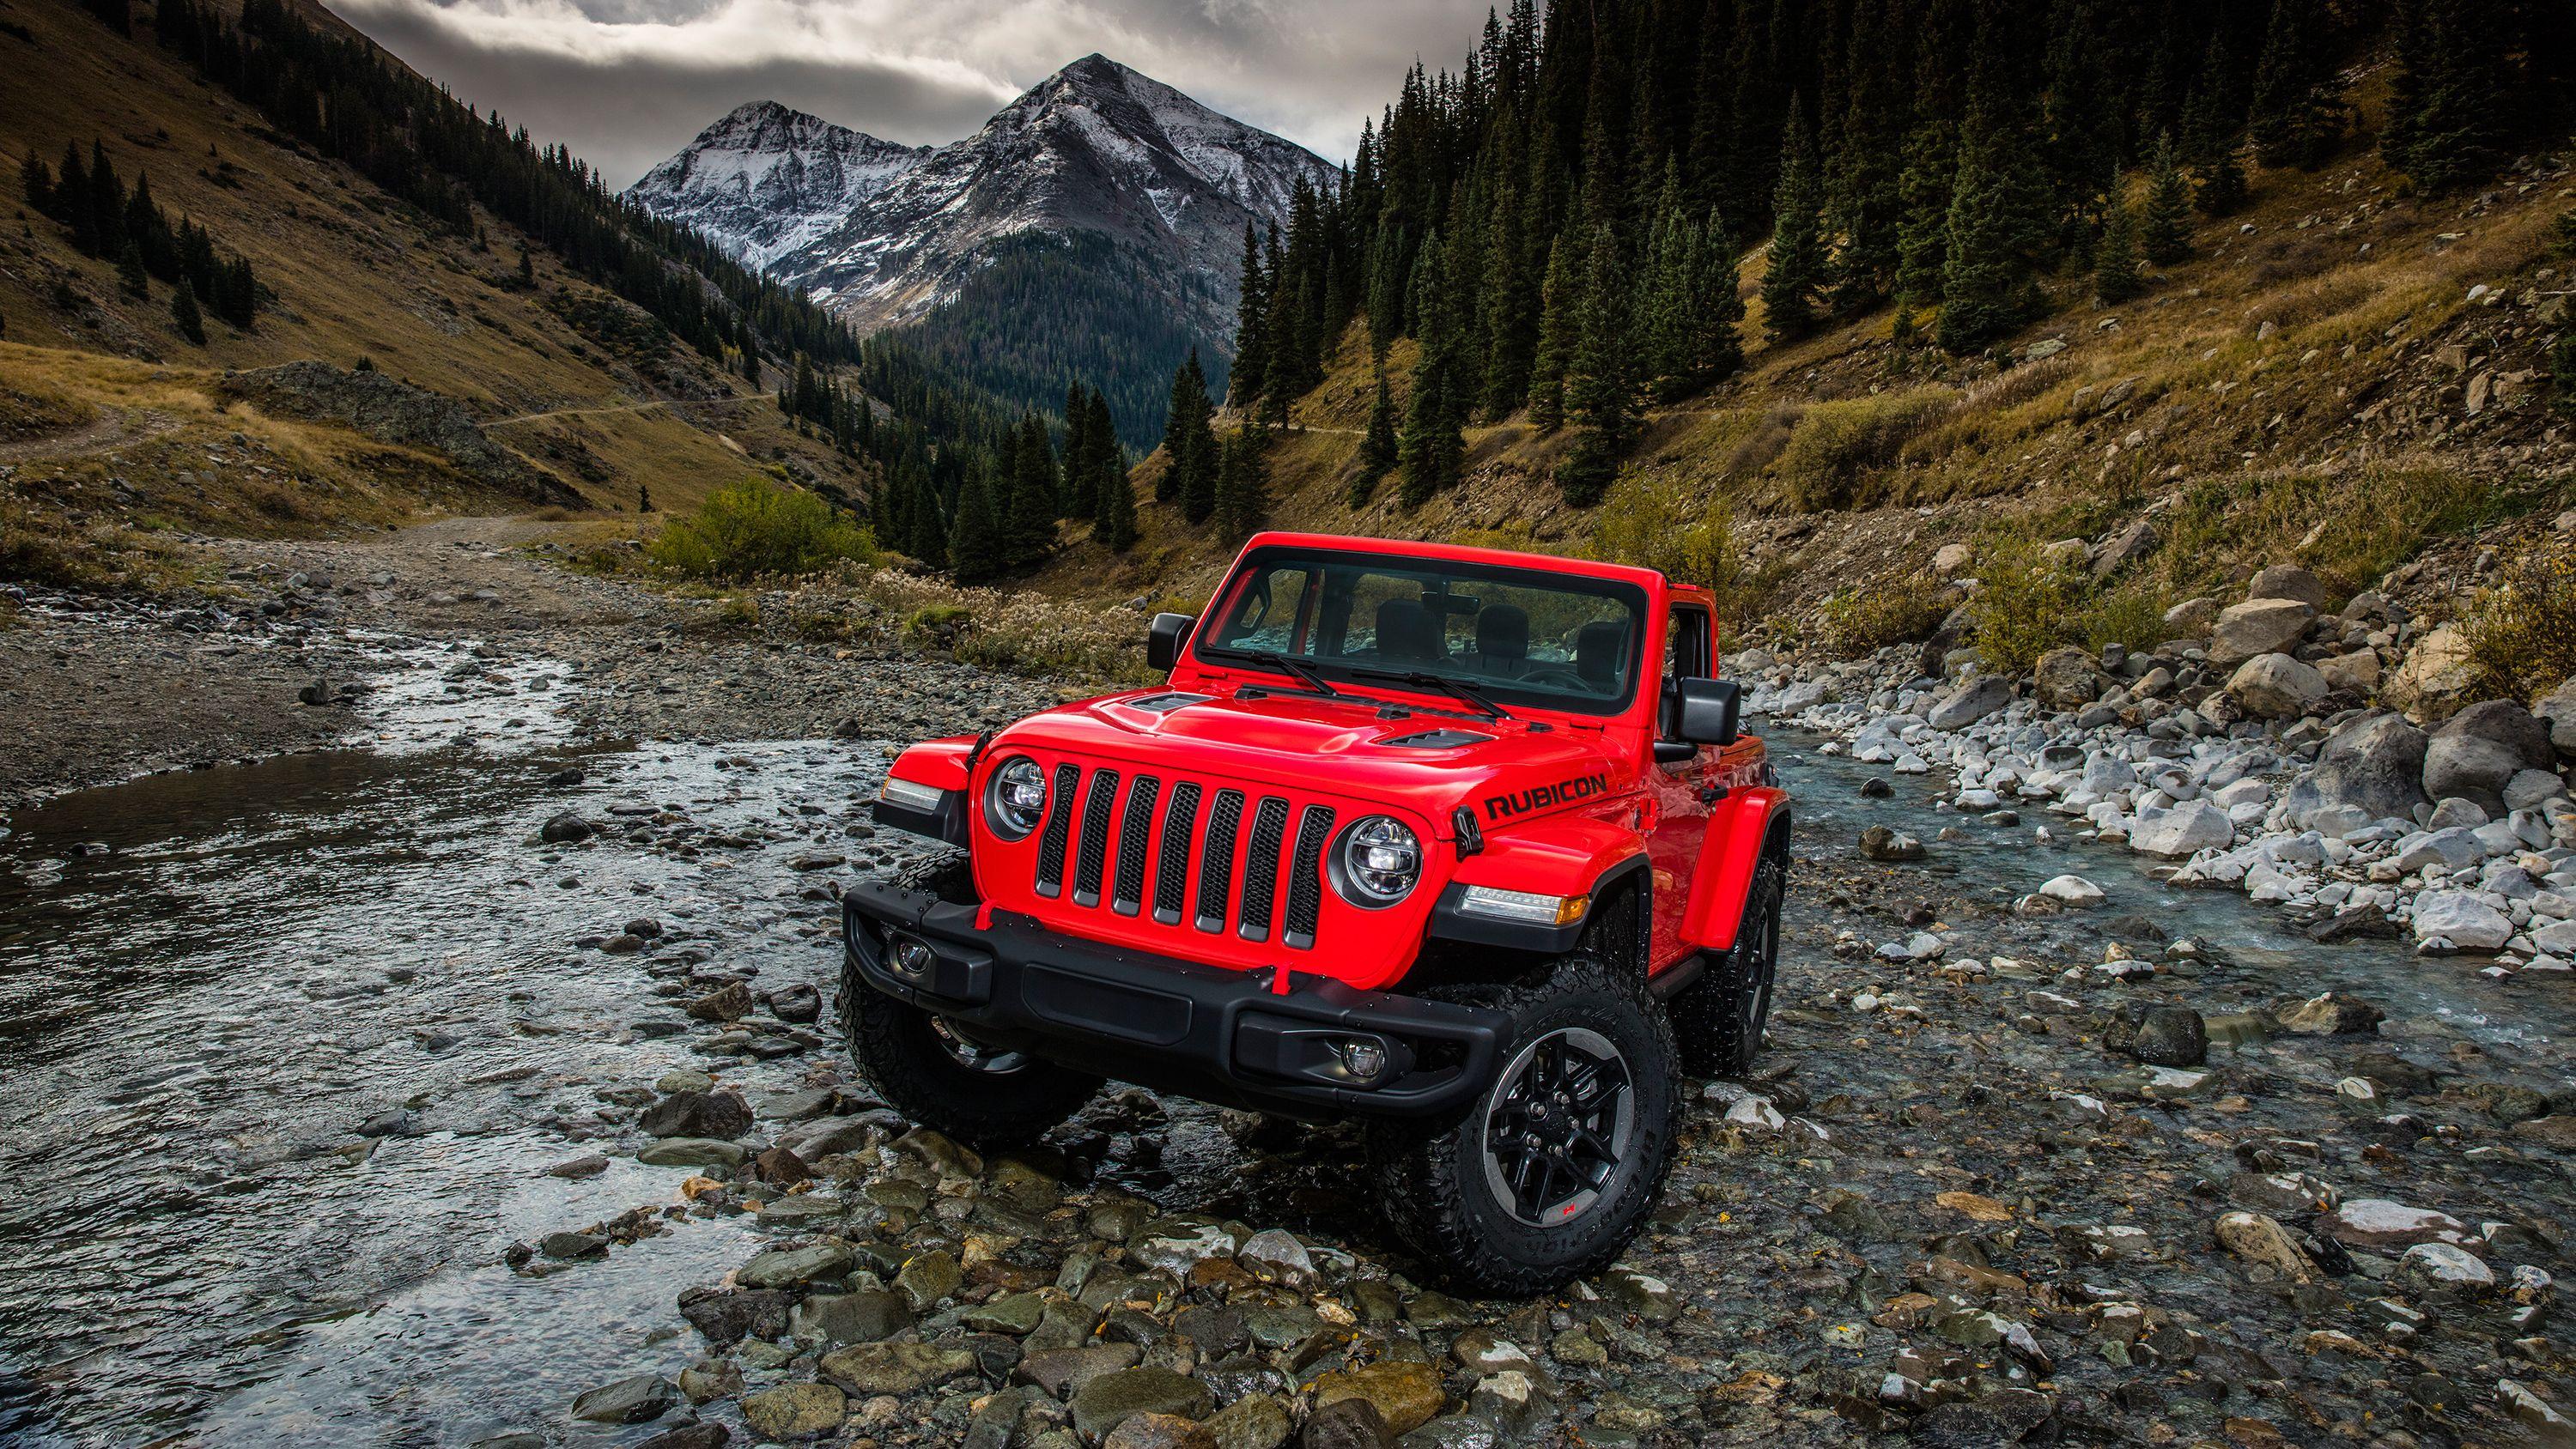 Jeep Wrangler Wallpapers - Top Free